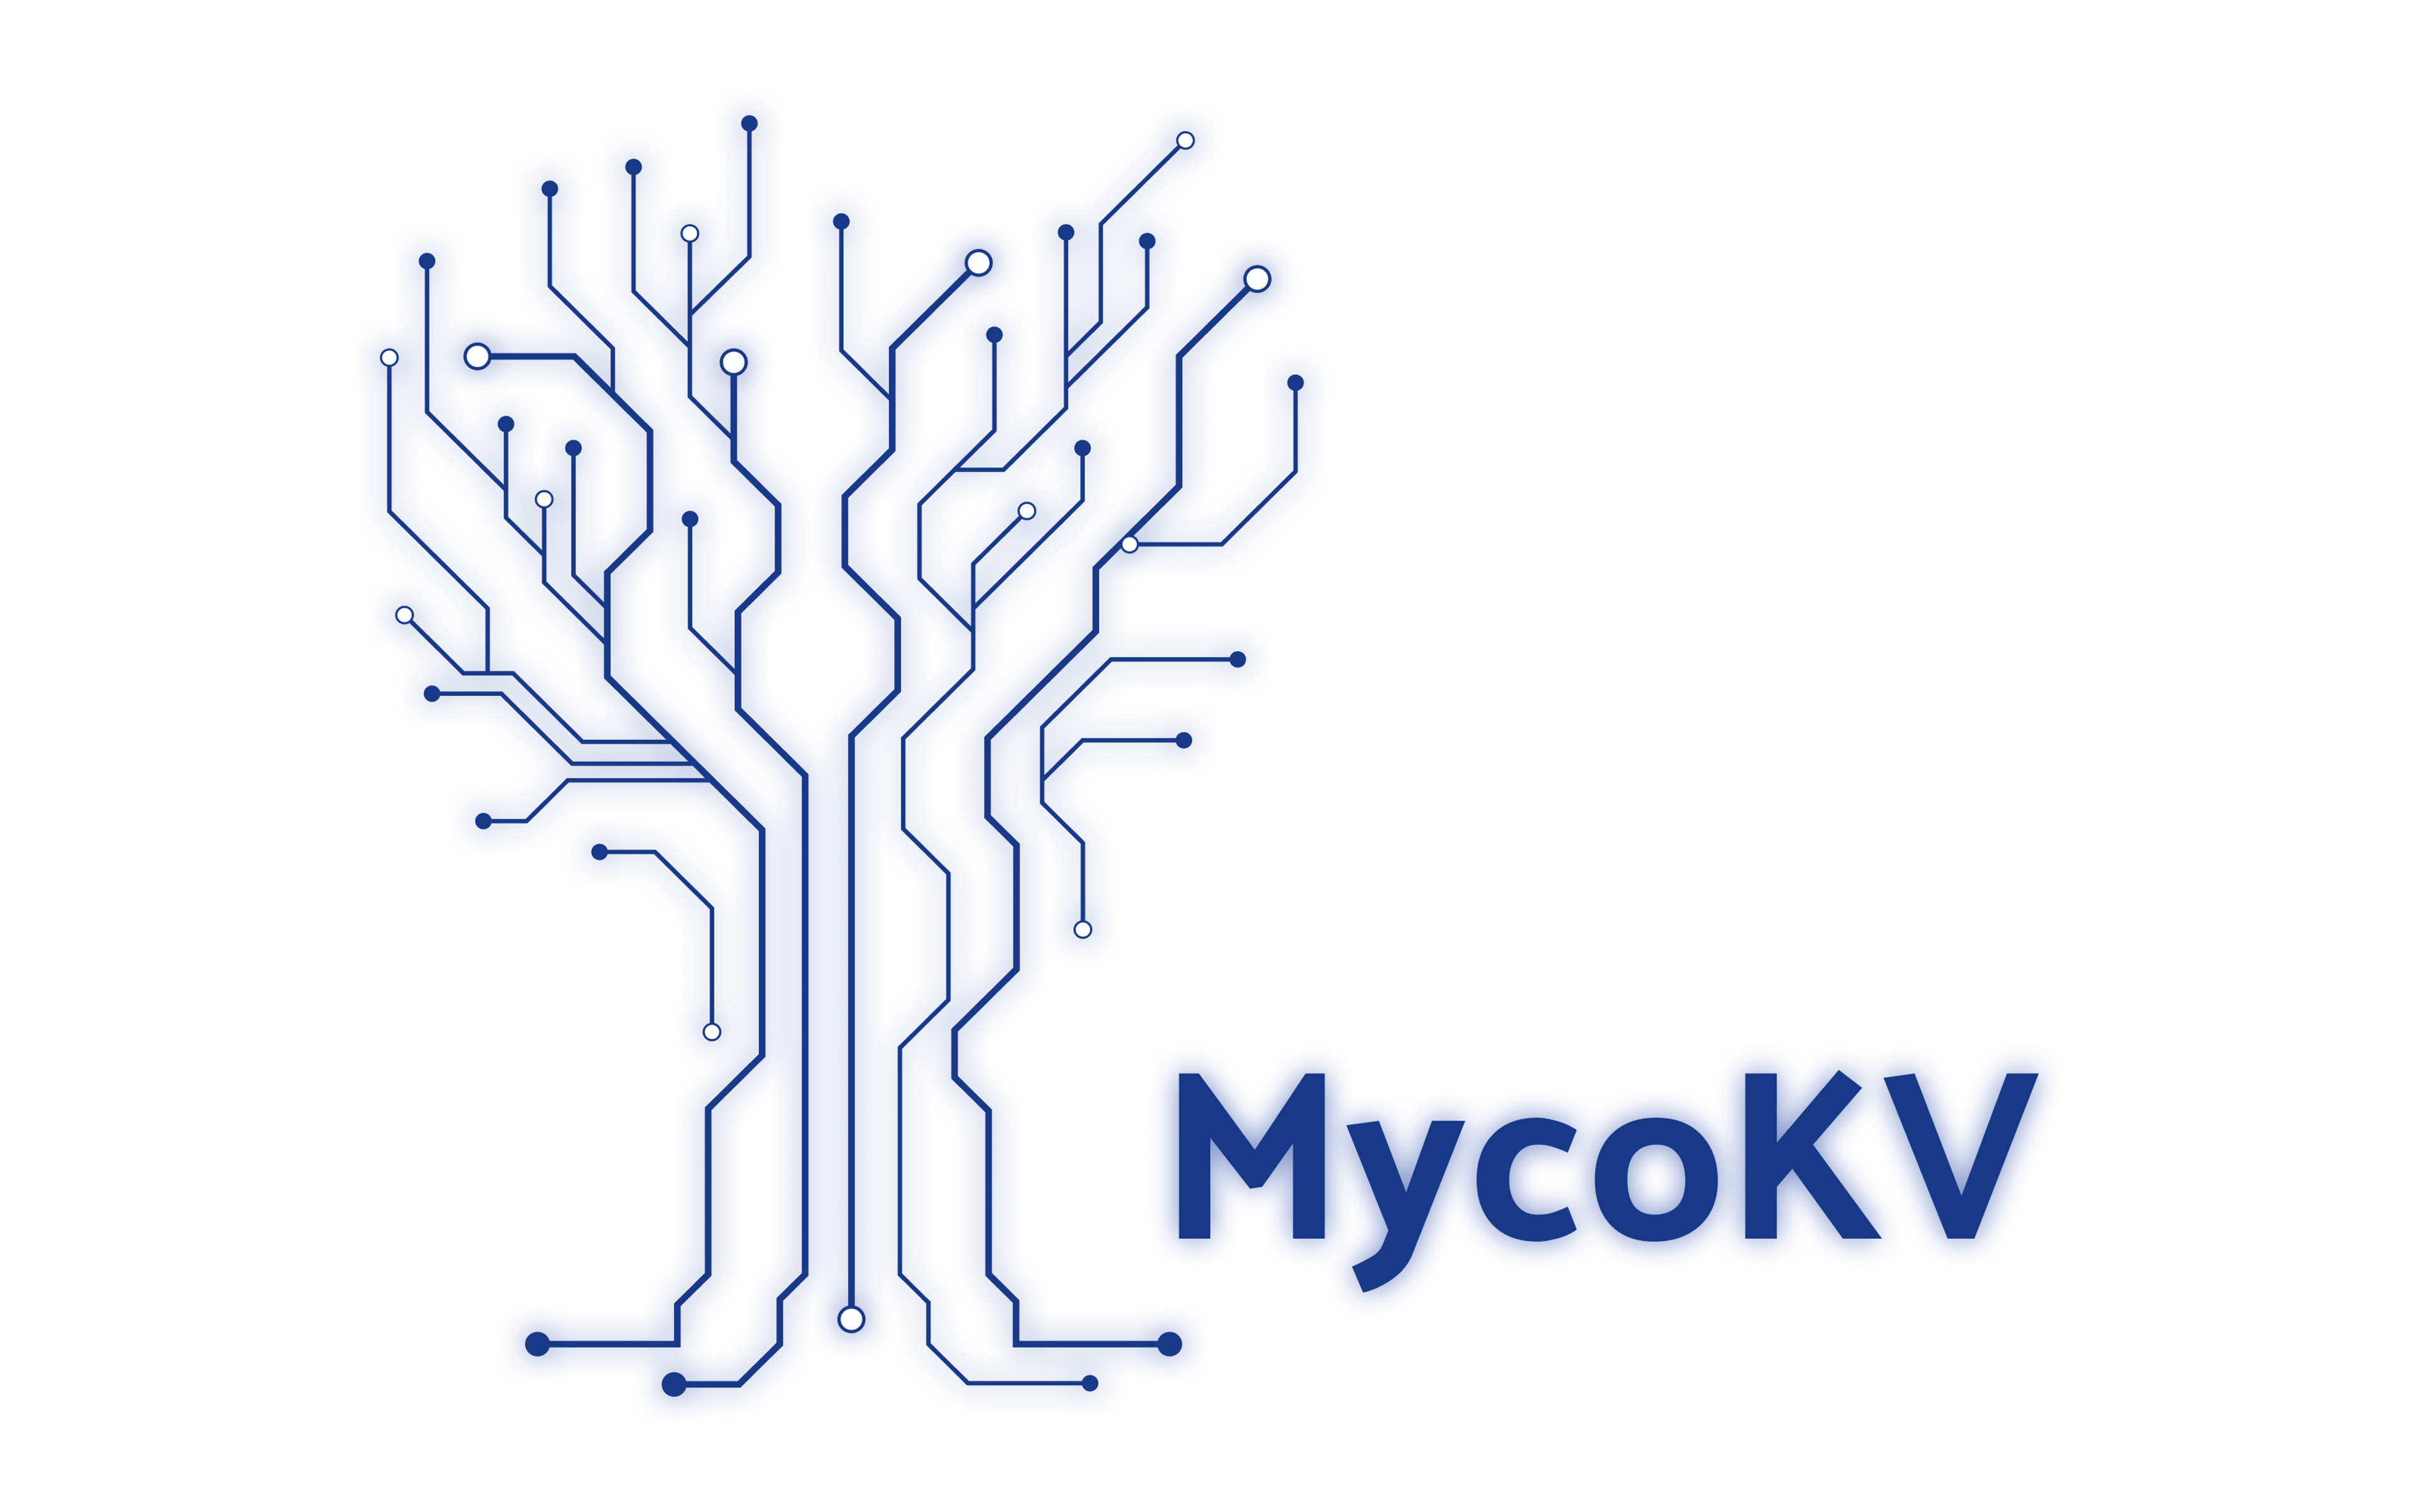 MycoKV logo which includes a tree drawn like circuitry